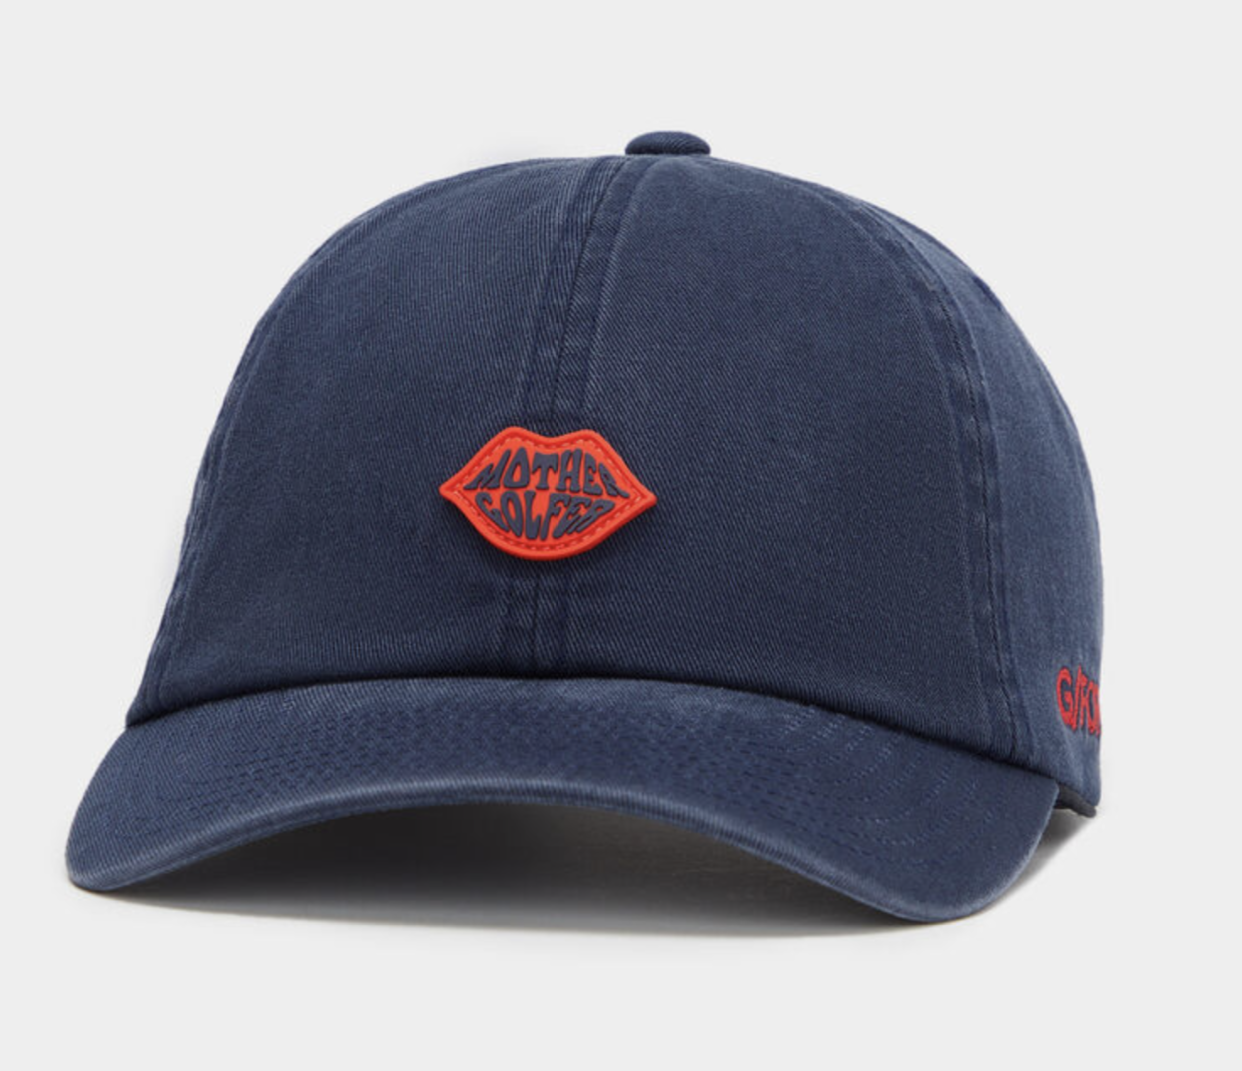 G/Fore Mother Golfer hat- $45